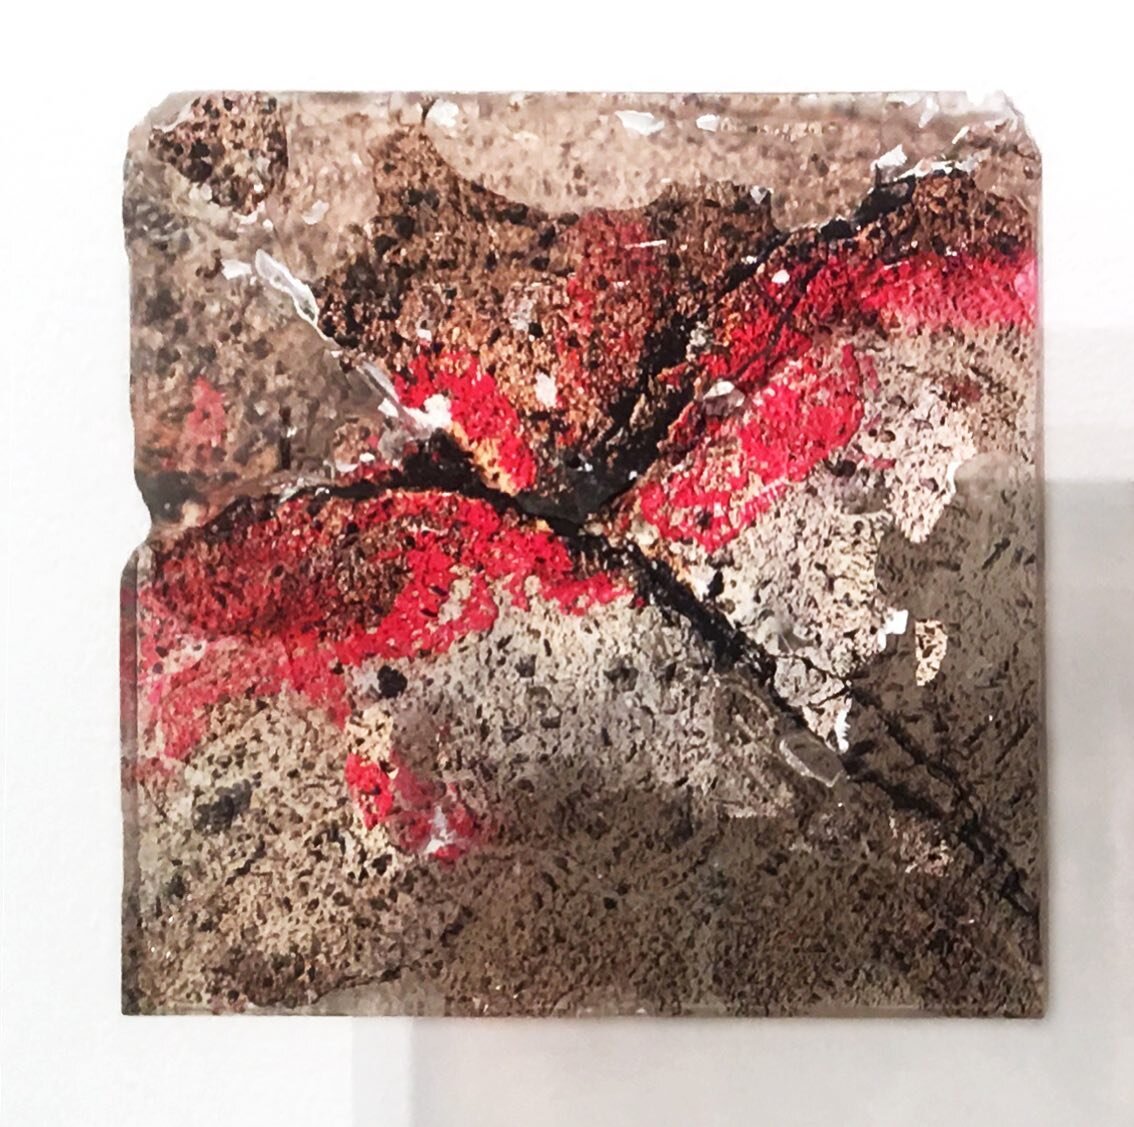 I have this little nugget up now @galeriepact for their show Entre(vues)

&lsquo;Any&rsquo;, 2019. Double sided pigment transfer and acrylic paint on carved acrylic, 8.5 x 8.5 in. 

Great group of artists: Andrew Grassie, Ethan Greenbaum,  Katharina 